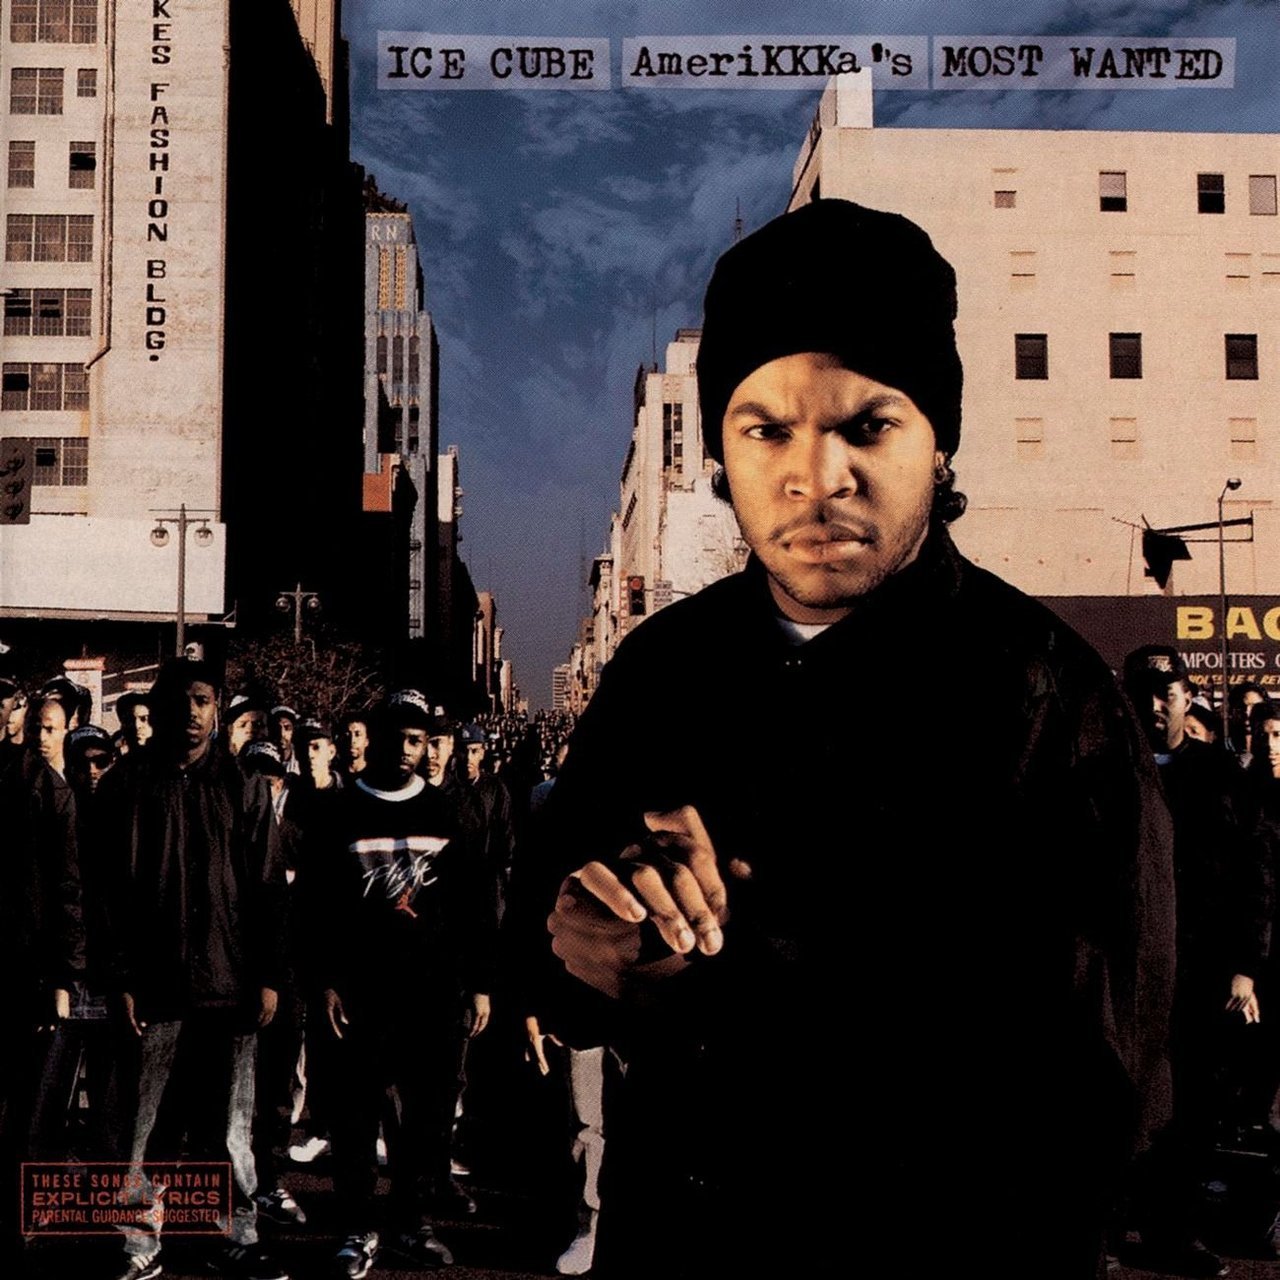 The Source |Today in Hip-Hop History: Ice Cube Dropped His First Solo LP 'Amerikkka's Most Wanted' 32 Years Ago #IceCube